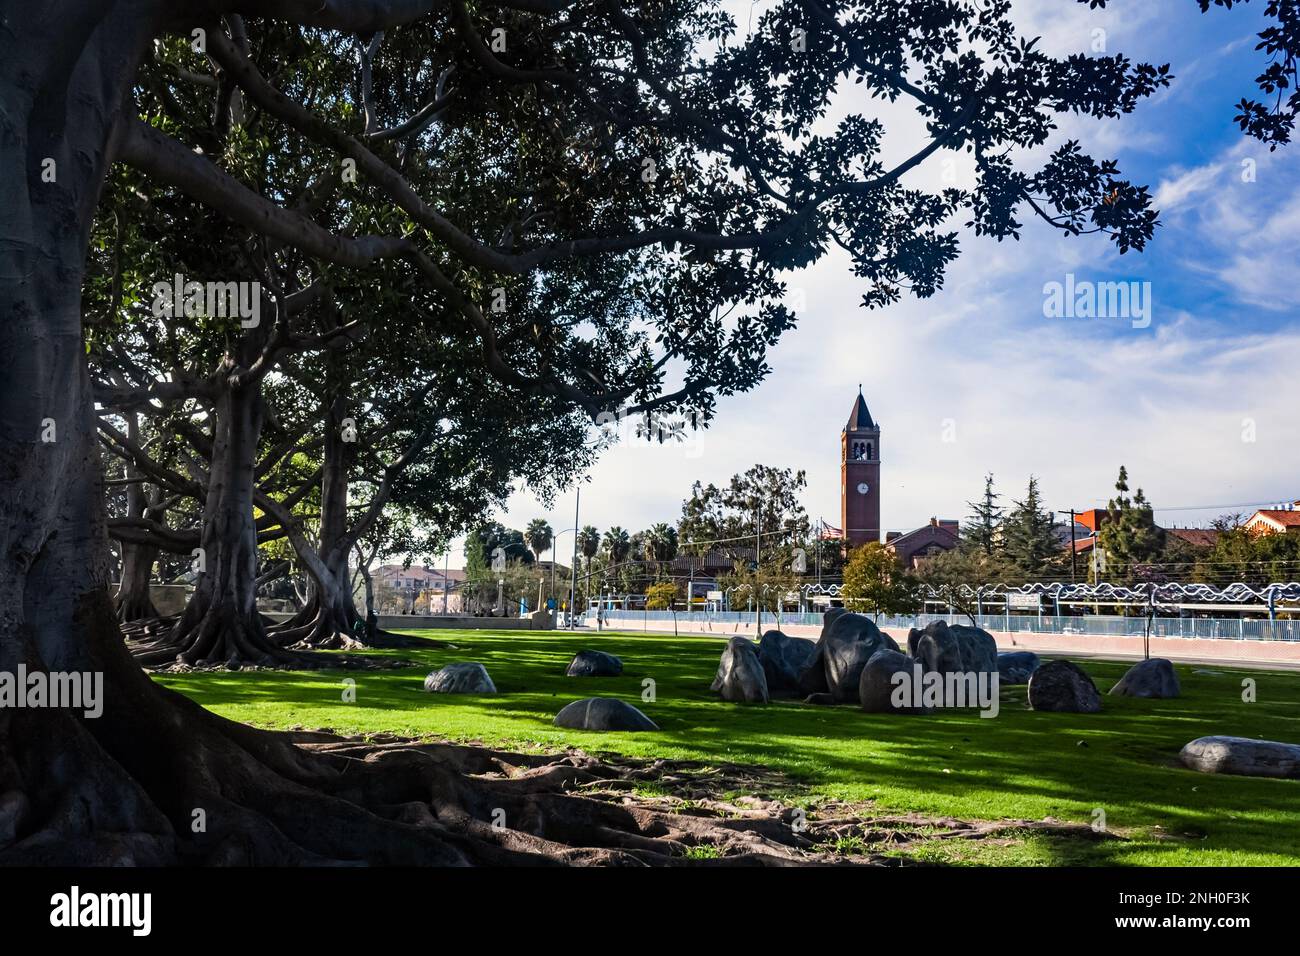 The clock tower of Mudd Hall of Philosophy at USC, the University of Southern California Stock Photo